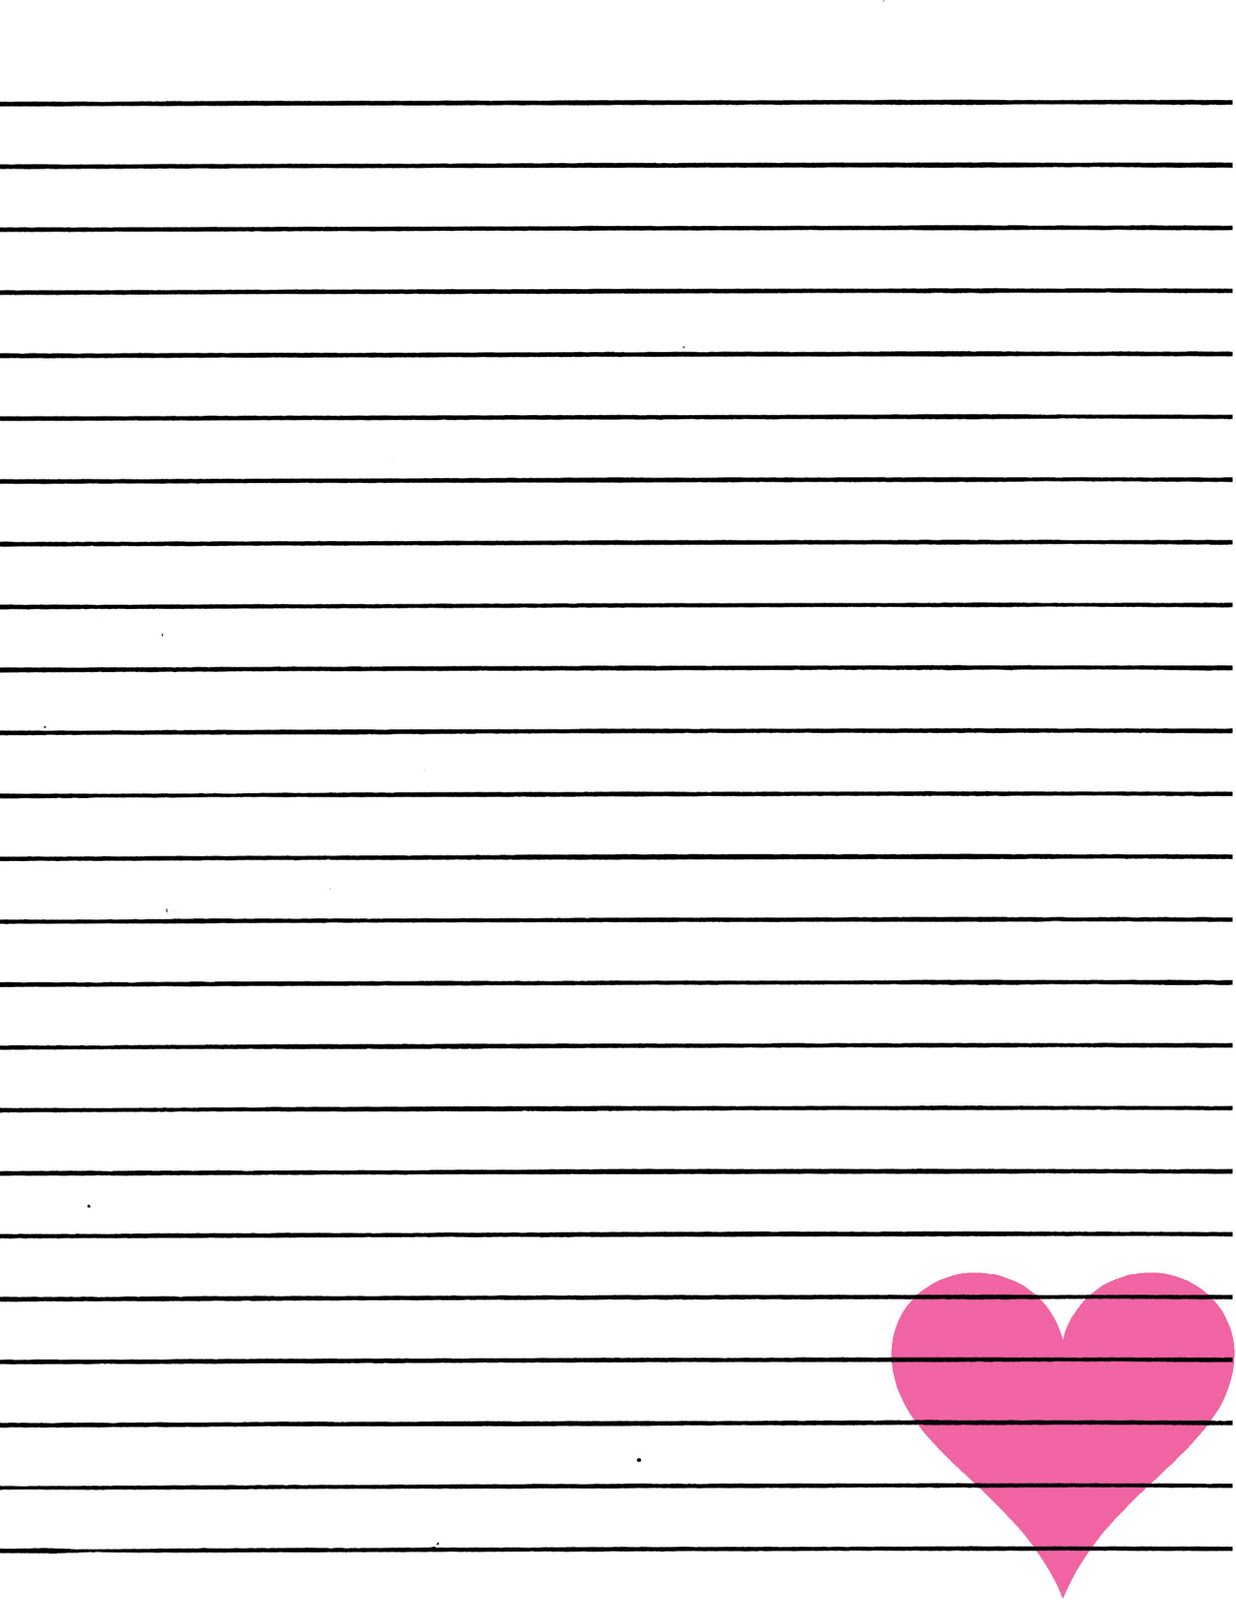 printable-lined-paper-for-notes-discover-the-beauty-of-printable-paper